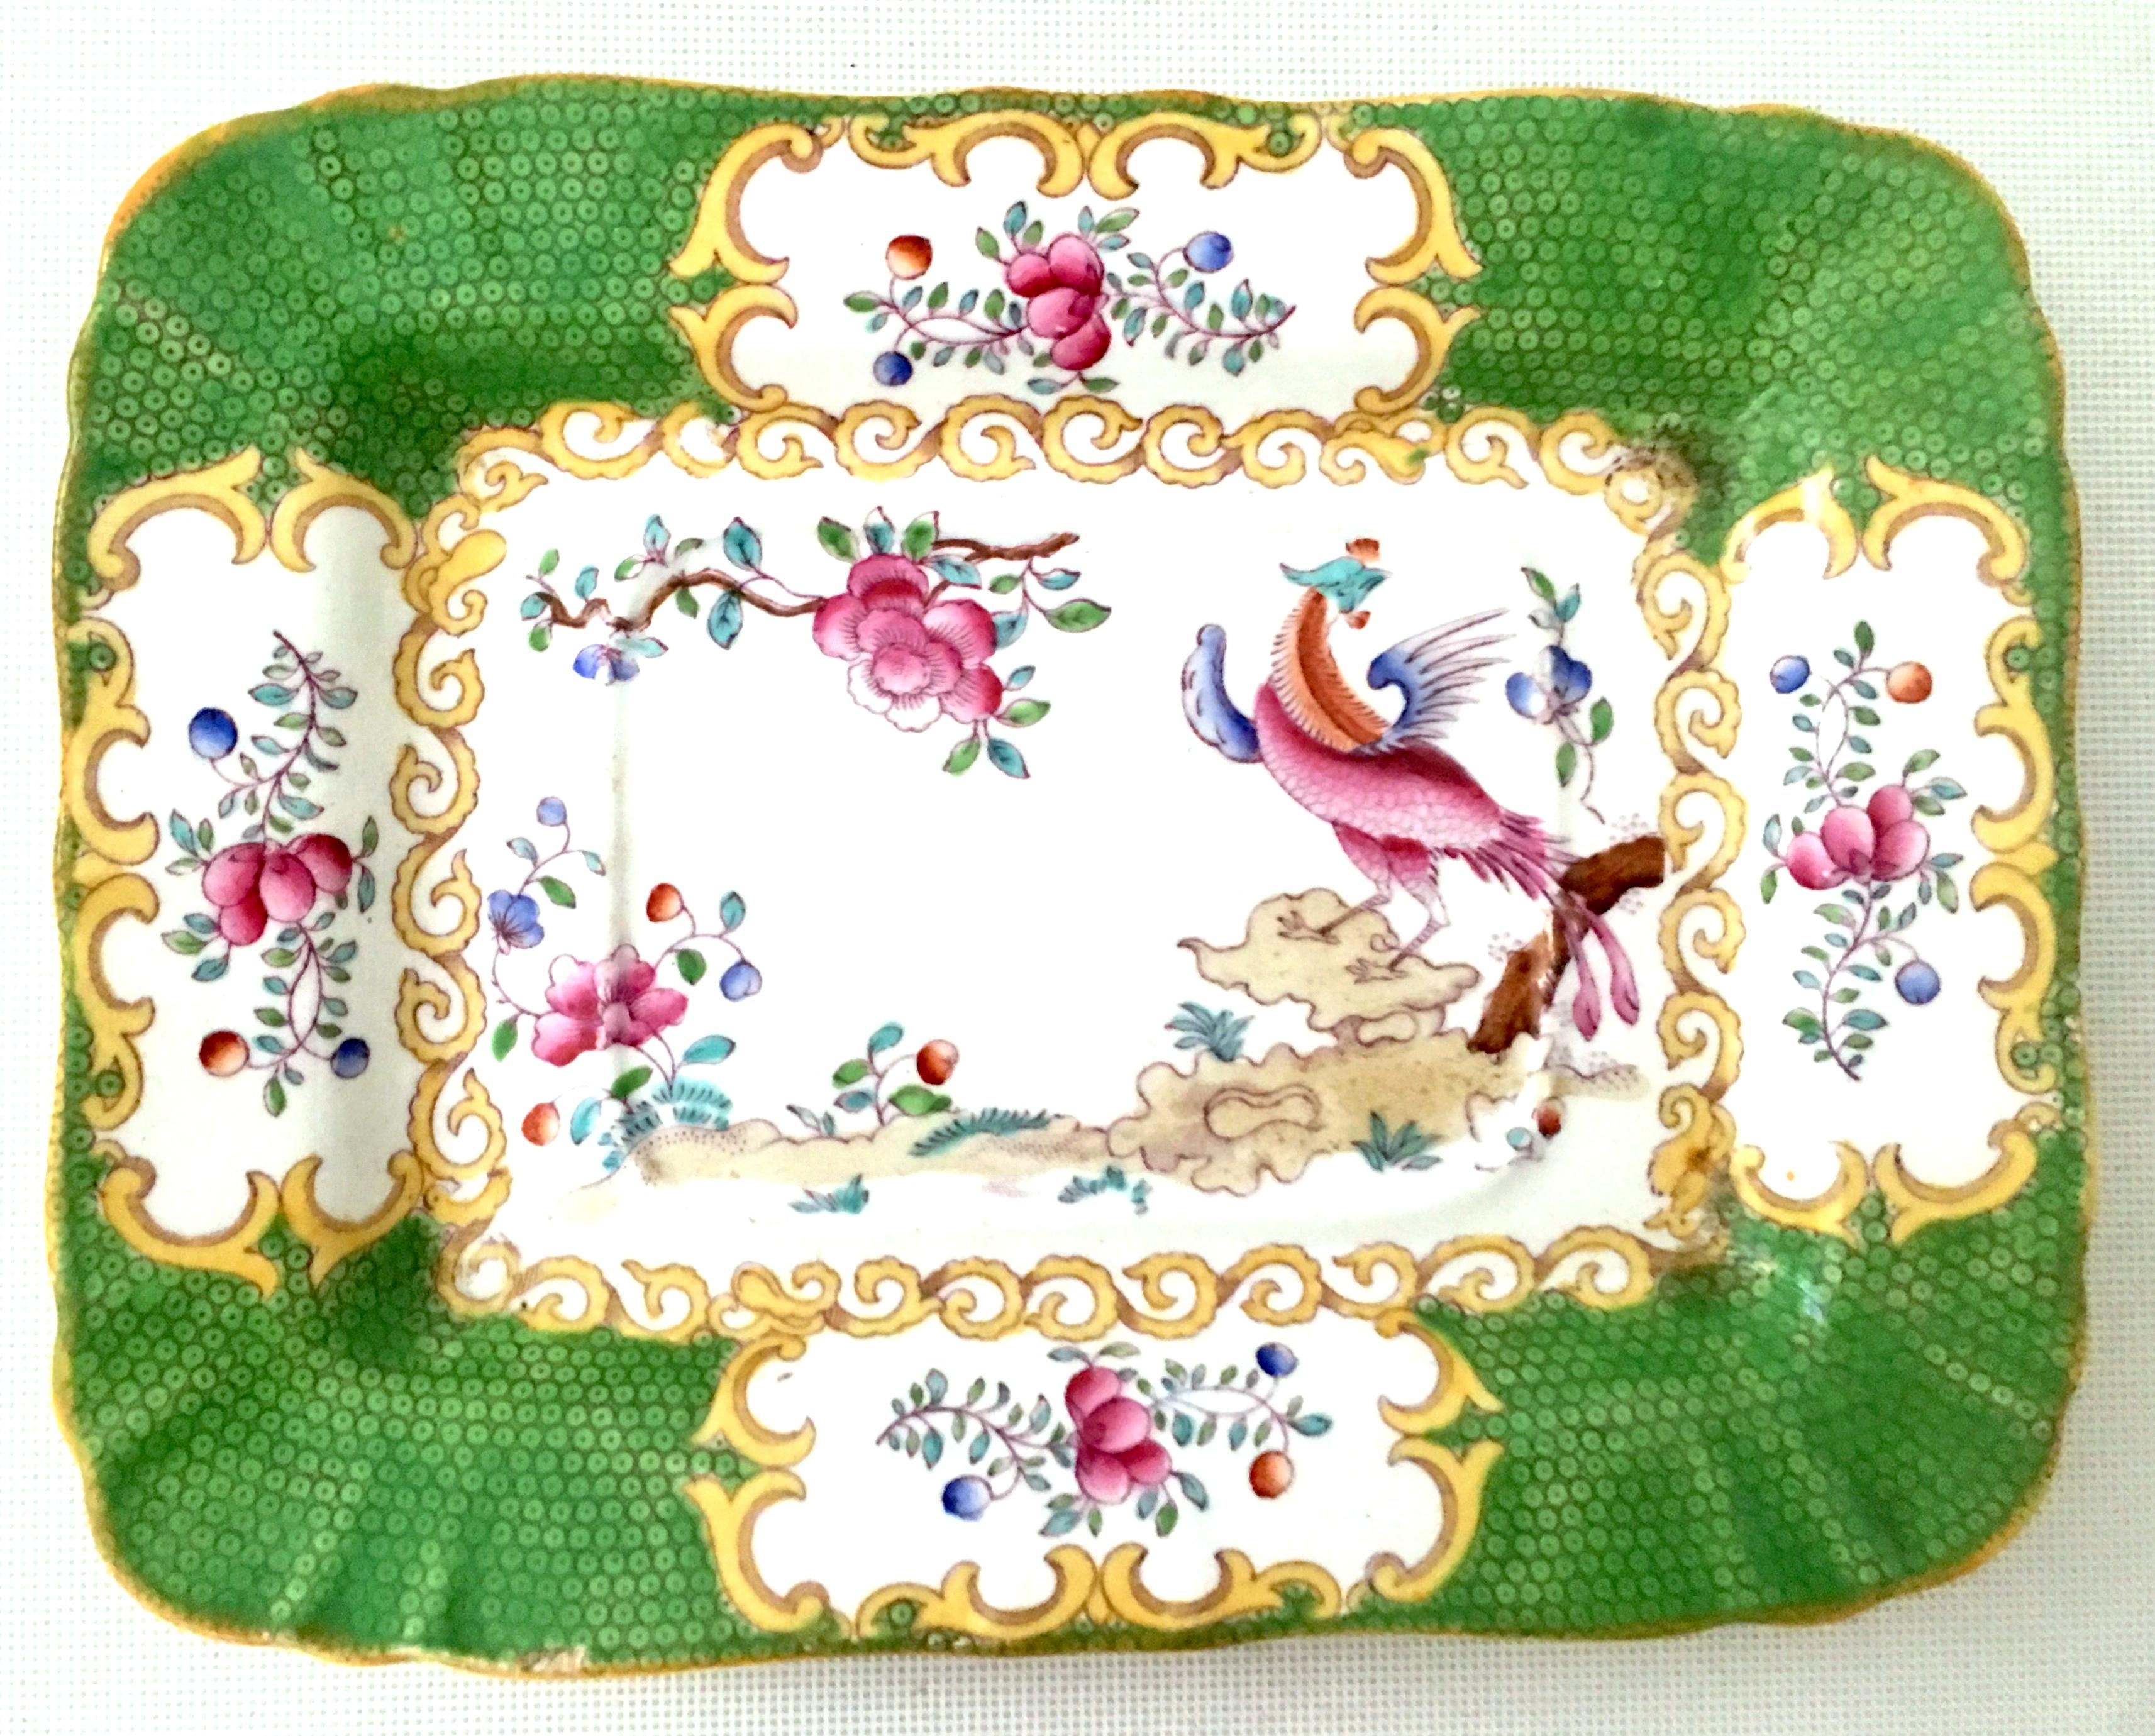 Antique Minton England hand painted porcelain & 22K gold tray's set of 2. These hand painted porcelain trays depict a multi color floral and bird with scroll detail motif. The chartreuse green dimensional dimpled edge is accented with a 22K gold